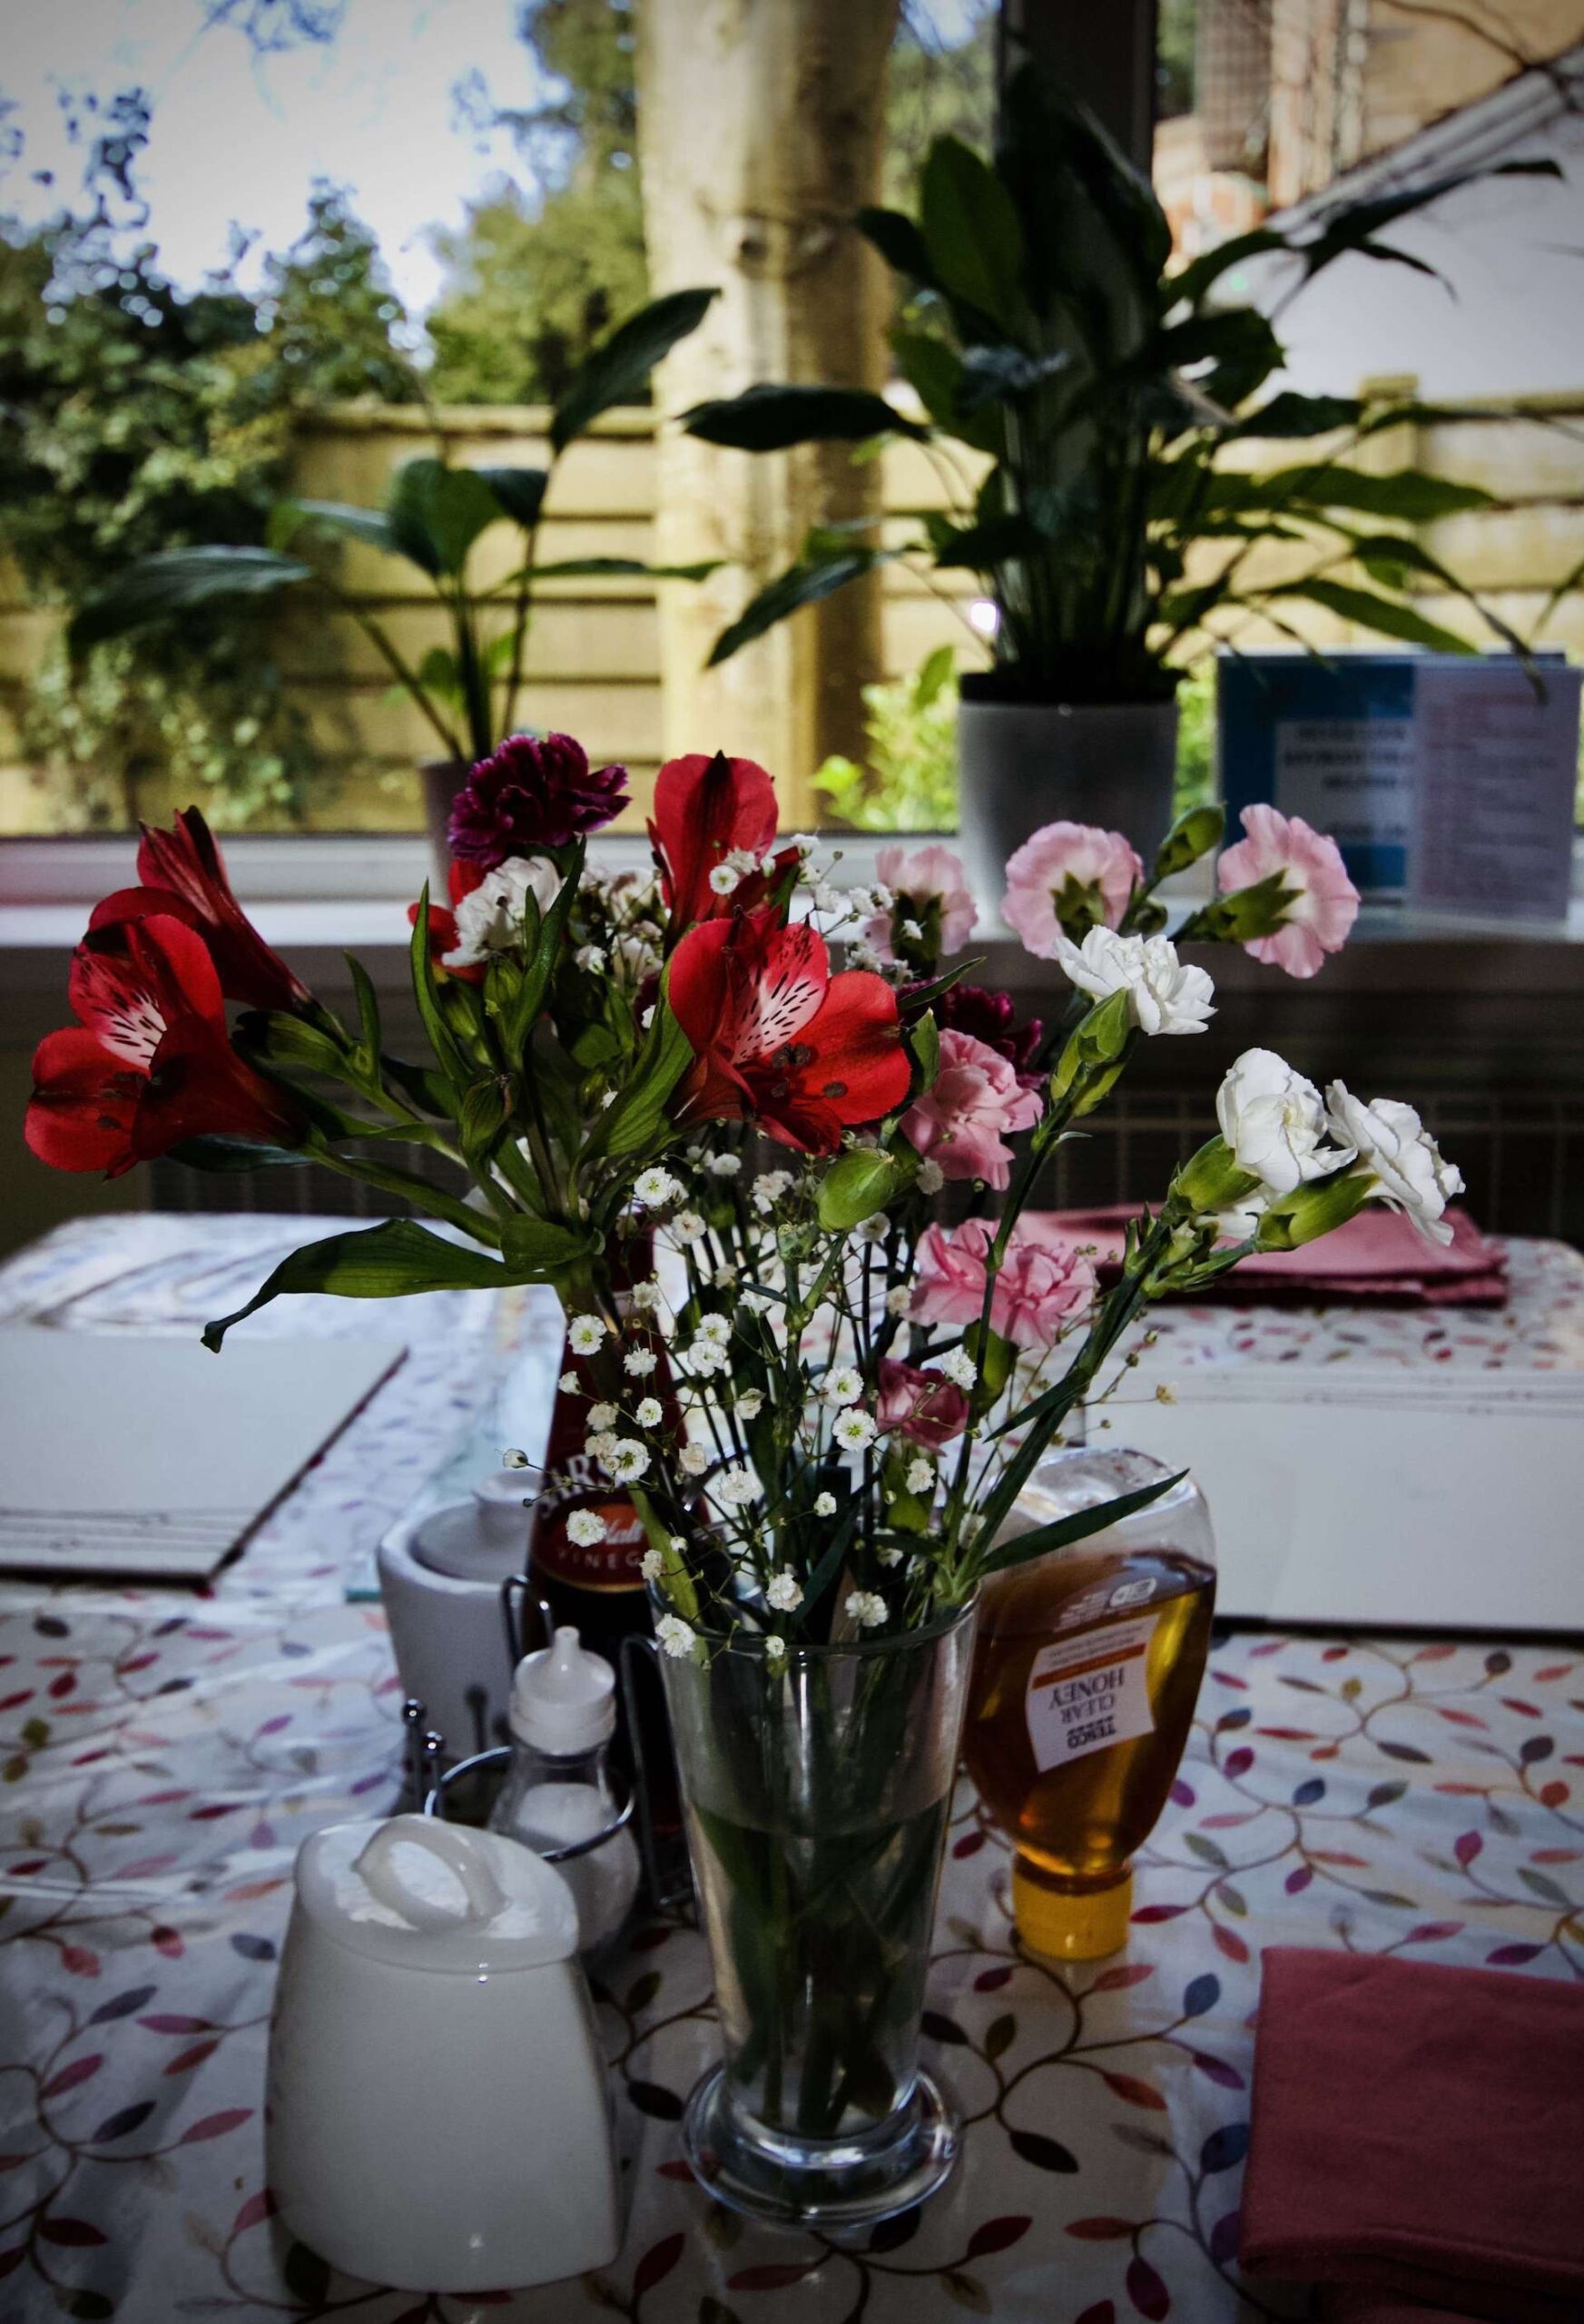 CCH Fairhaven Gallery Image showing an inside shot of a bunch of flowers sat on a table